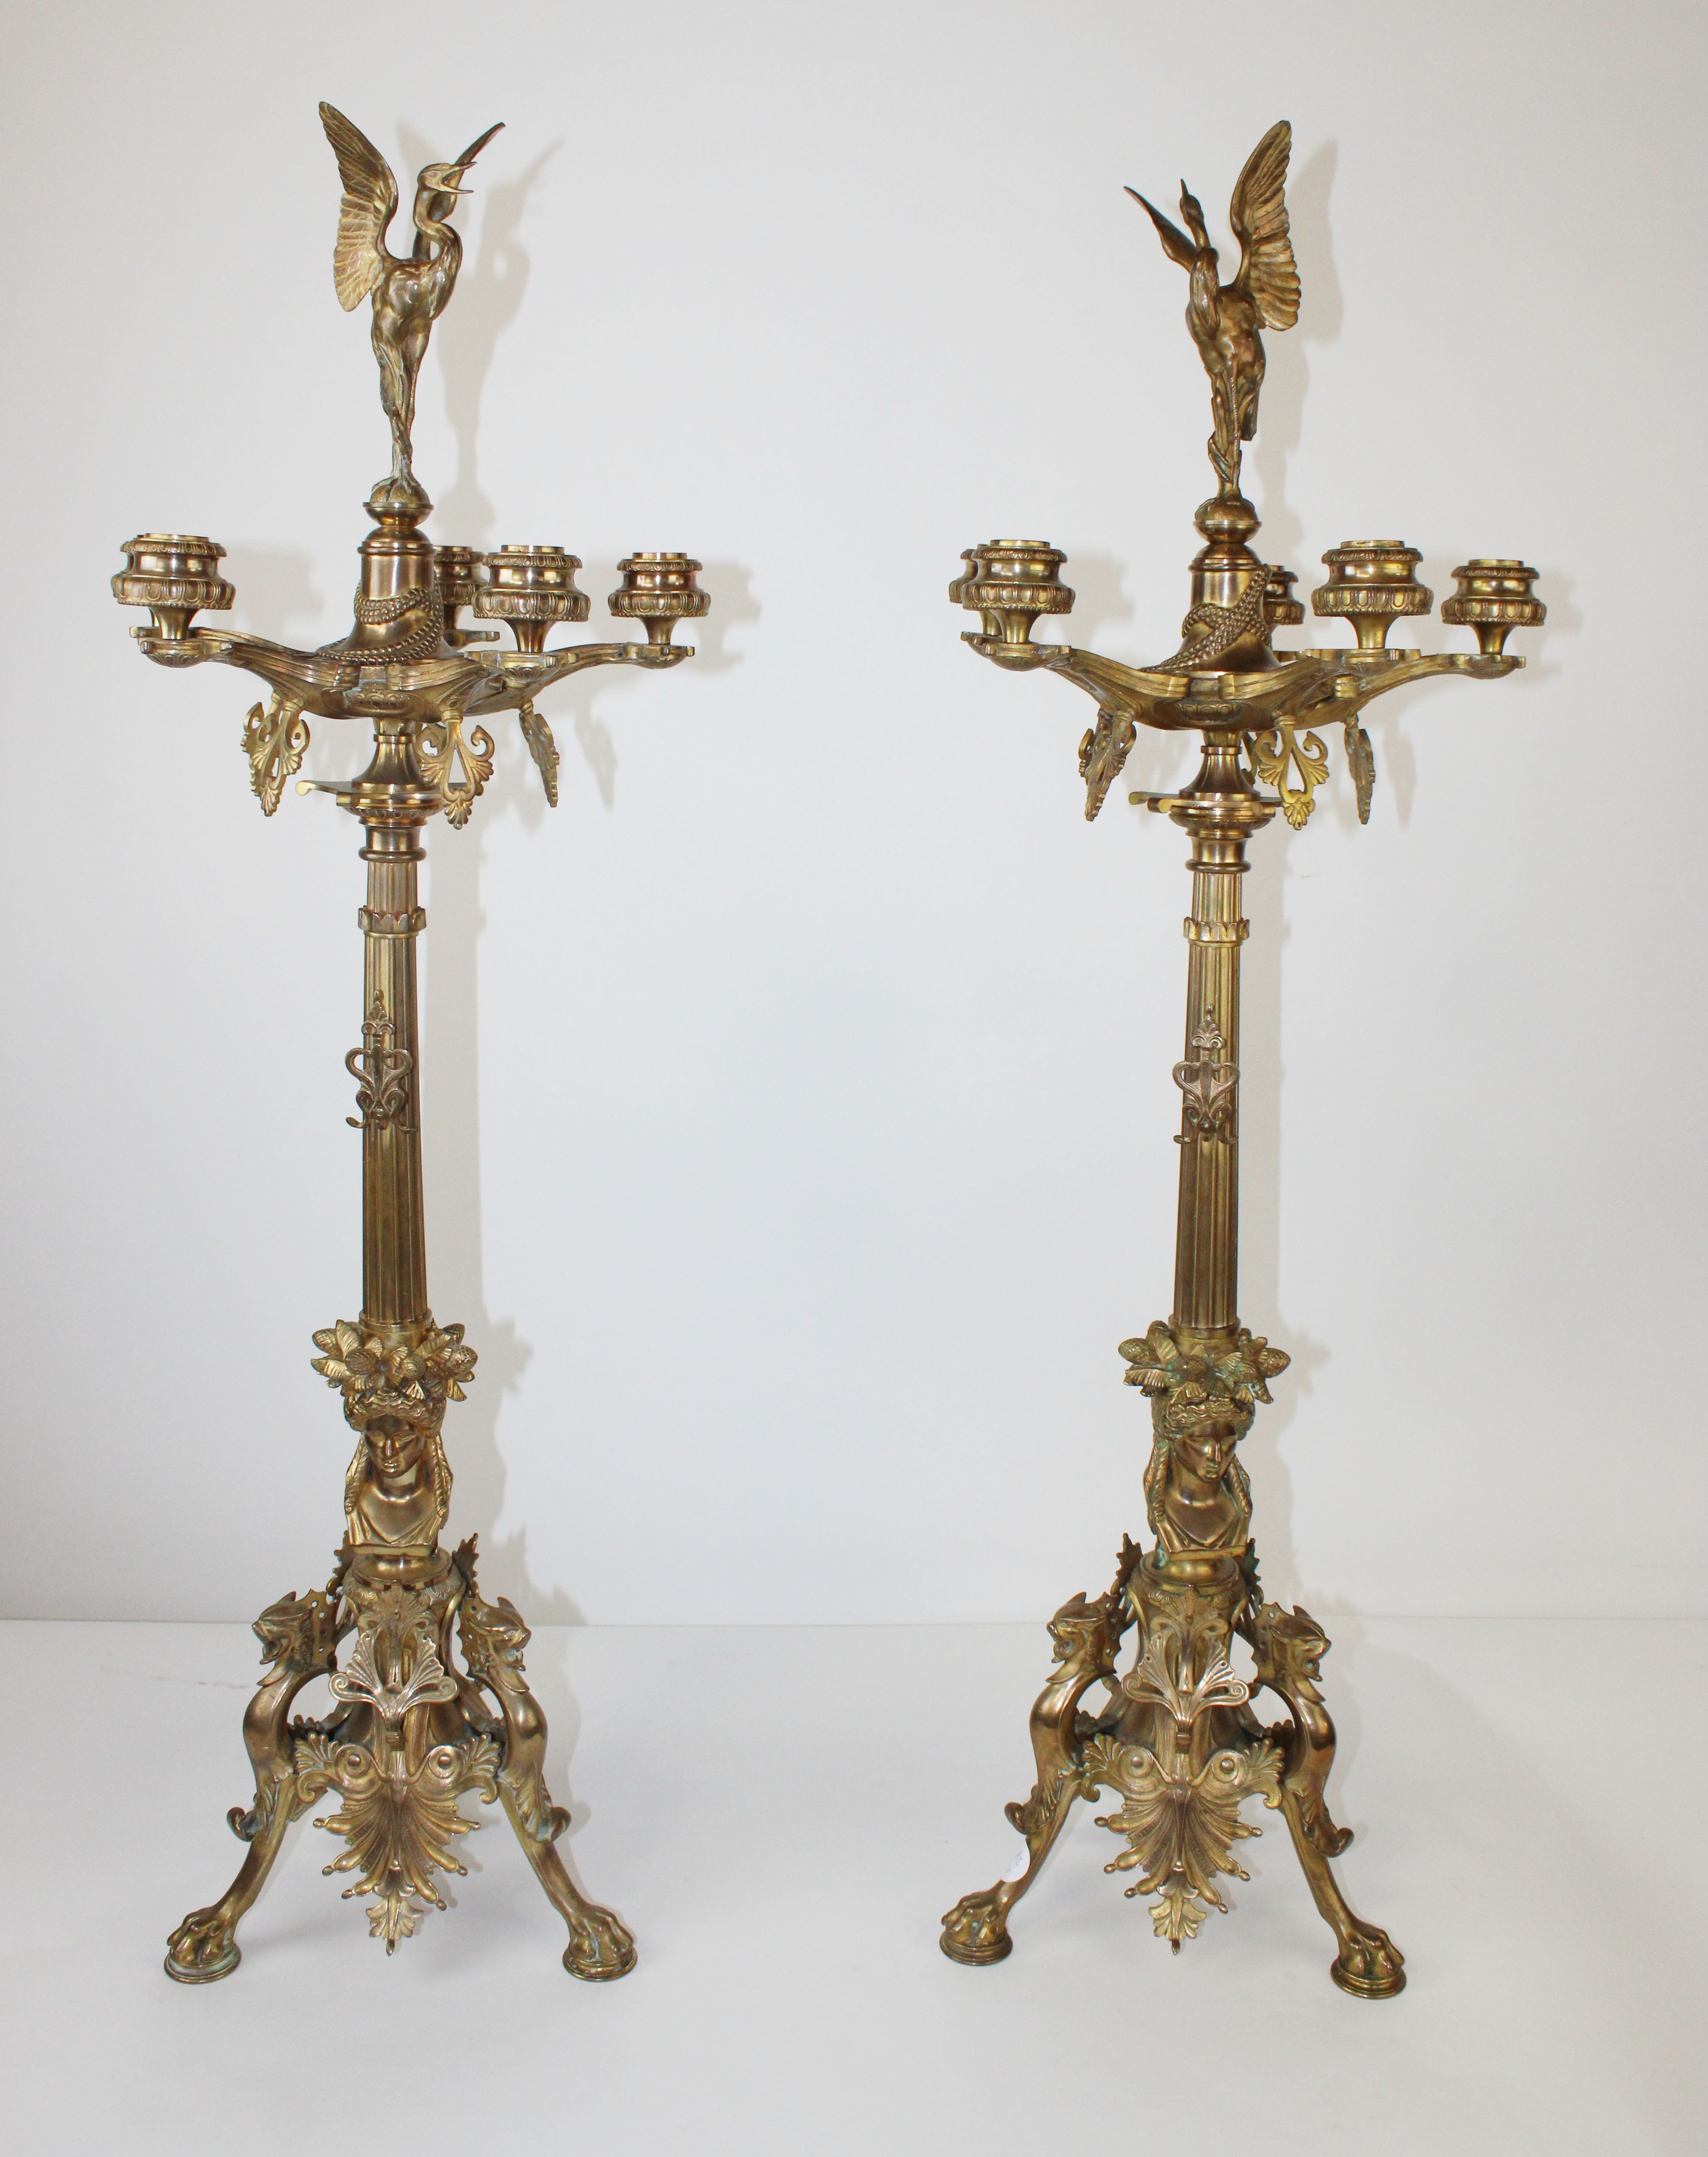 Pair French Empire Barbedienne bronze candelabra. Each having a figural sphinx supporting a fluted column and giving rise to 5 arms and surmounted with a crane.